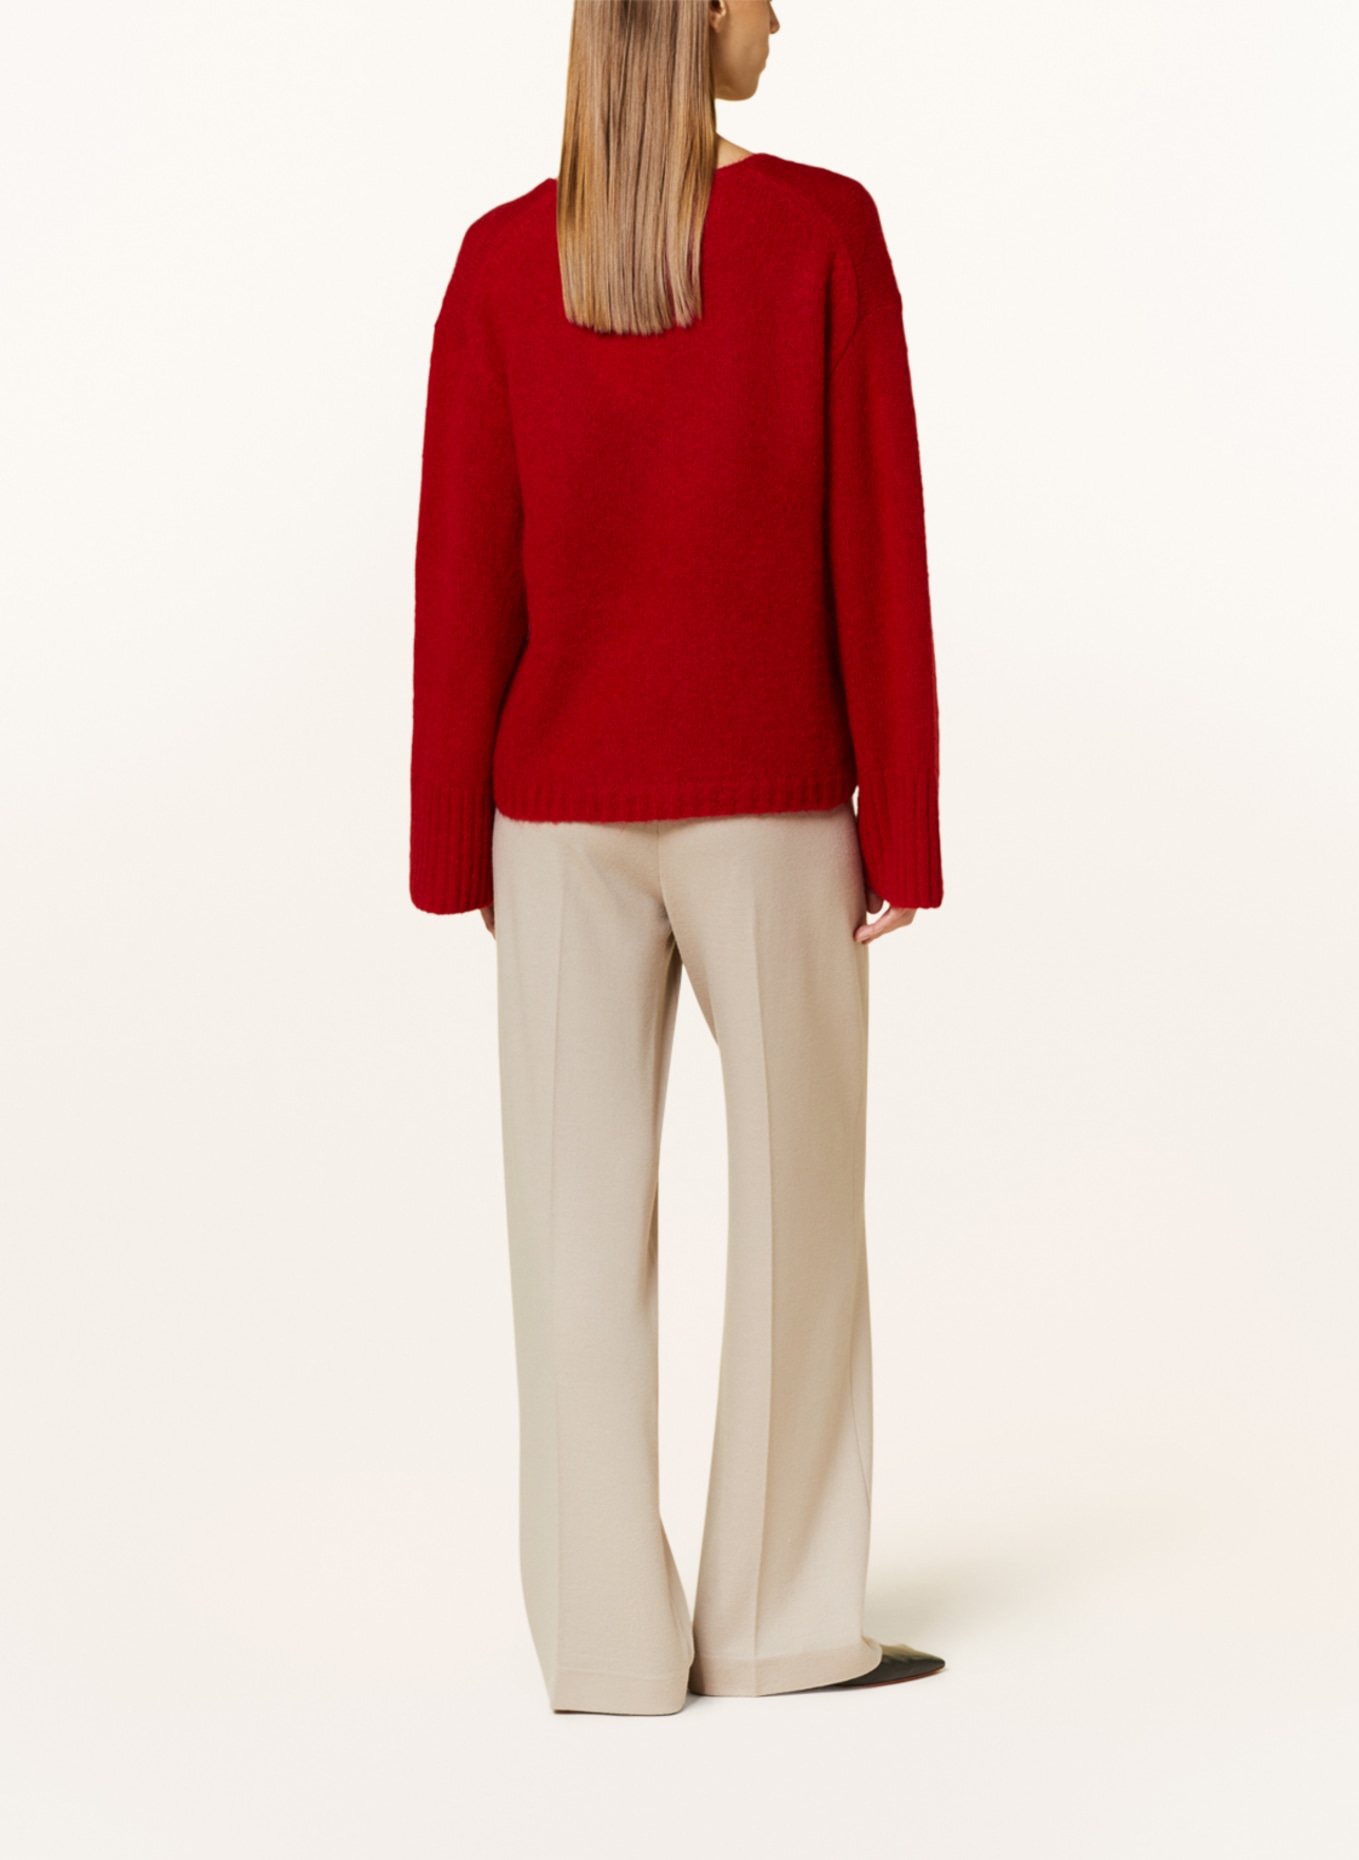 BY MALENE BIRGER Sweater CIMONE with mohair, Color: RED (Image 3)